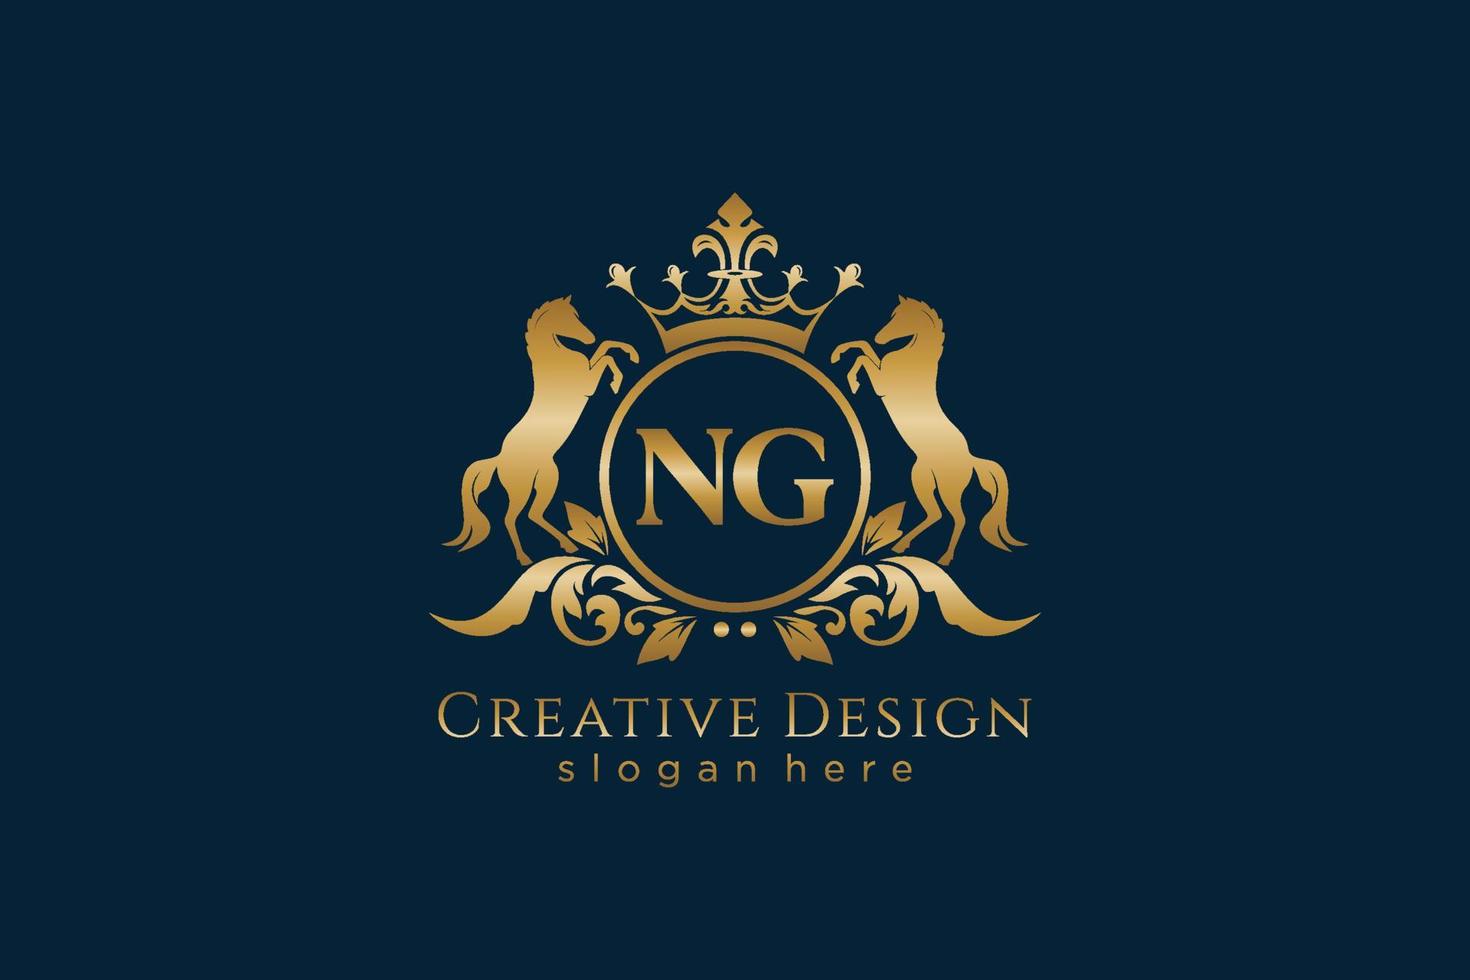 initial NG Retro golden crest with circle and two horses, badge template with scrolls and royal crown - perfect for luxurious branding projects vector